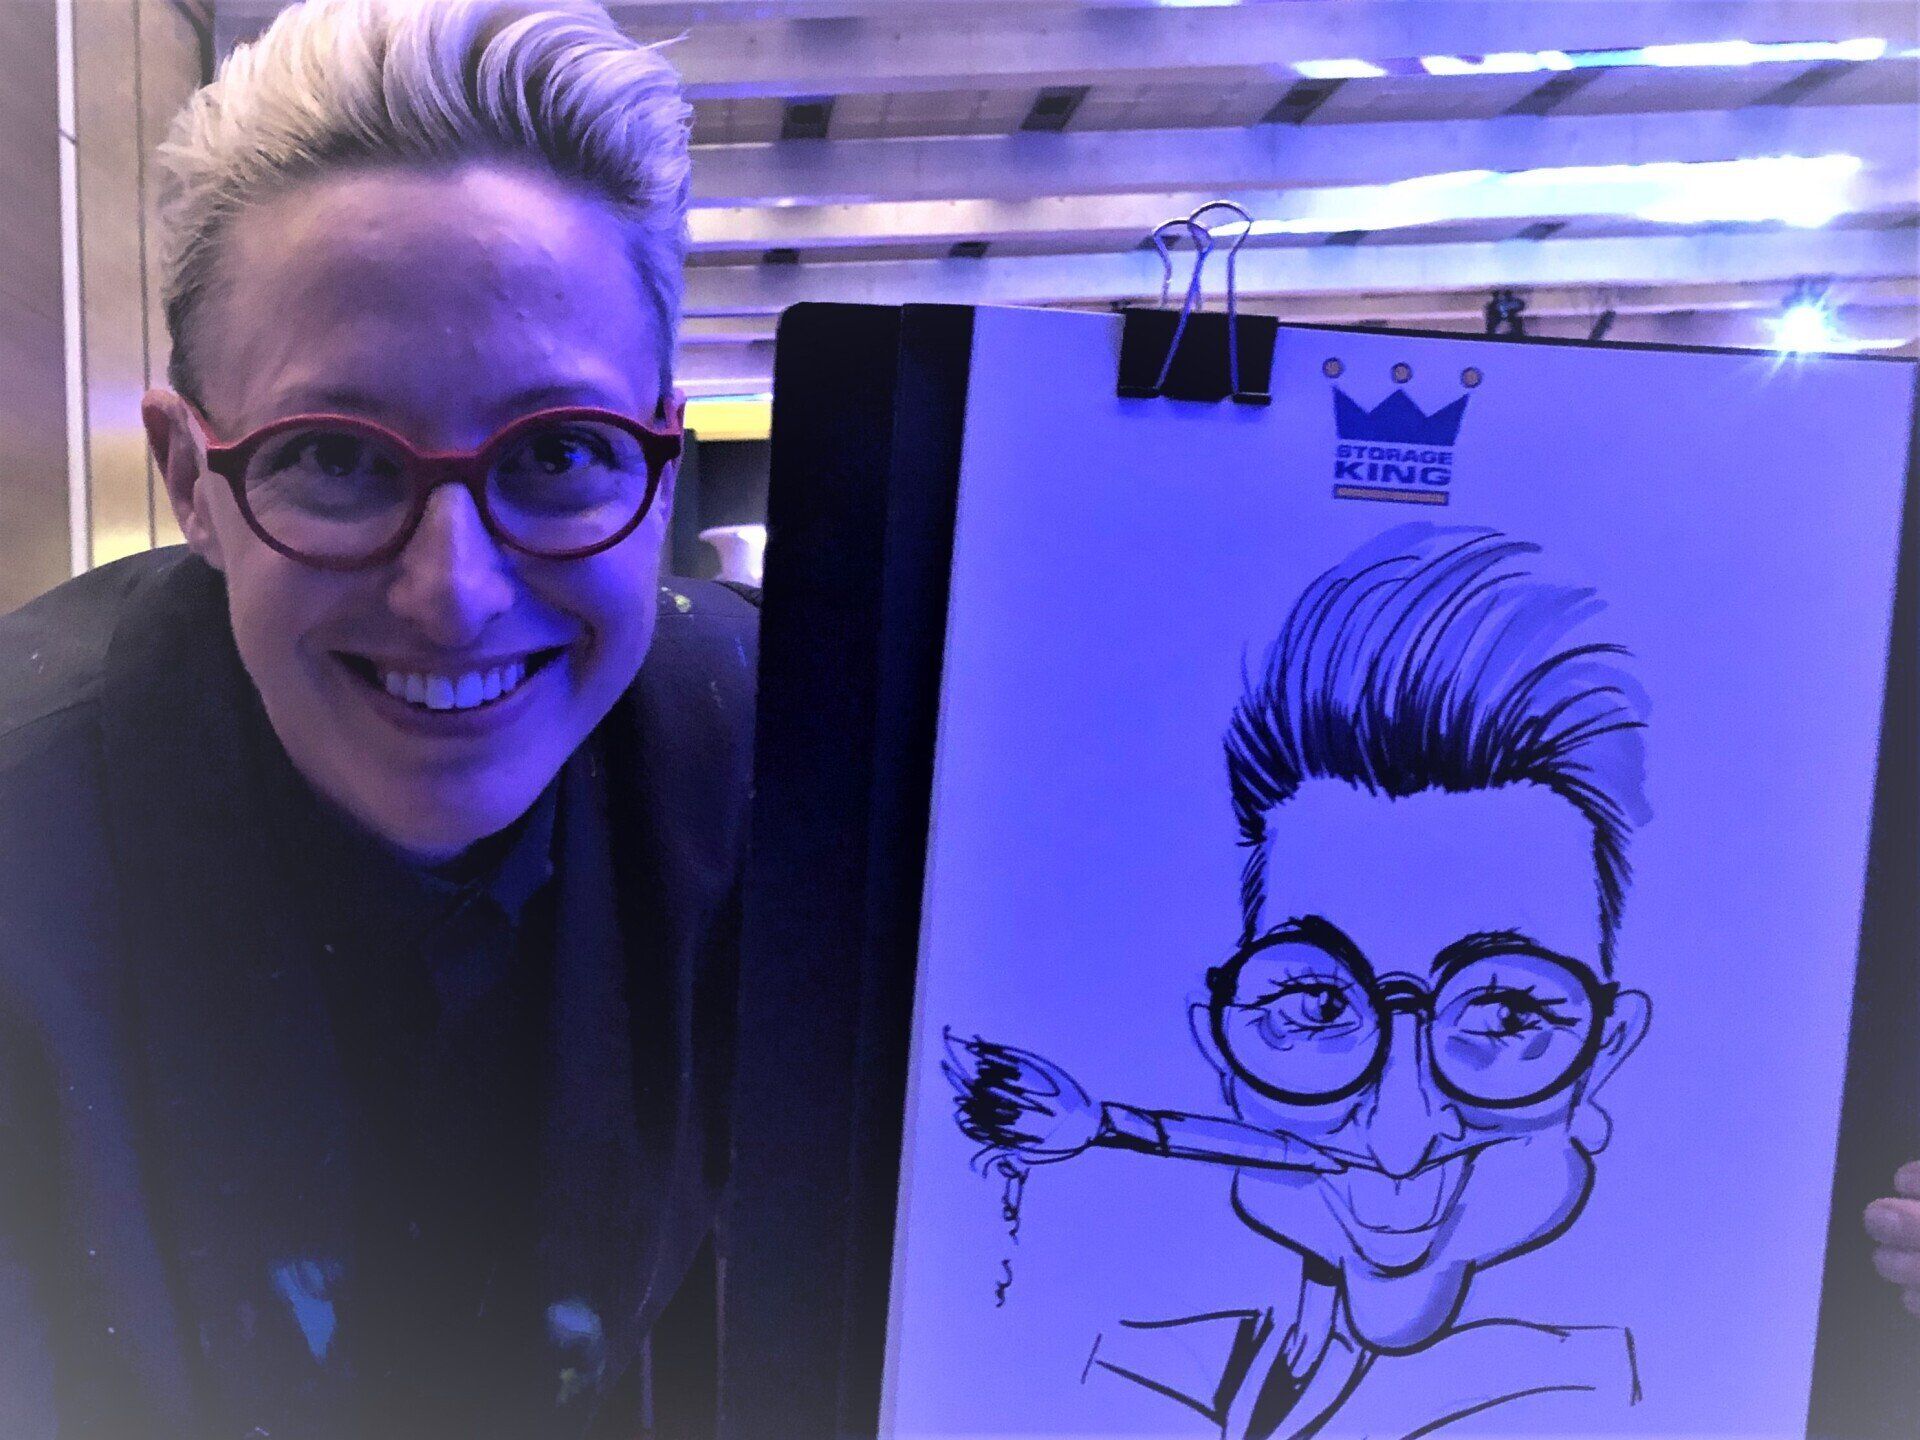 Event hire cartoonist David Green drawing live caricatures at events.